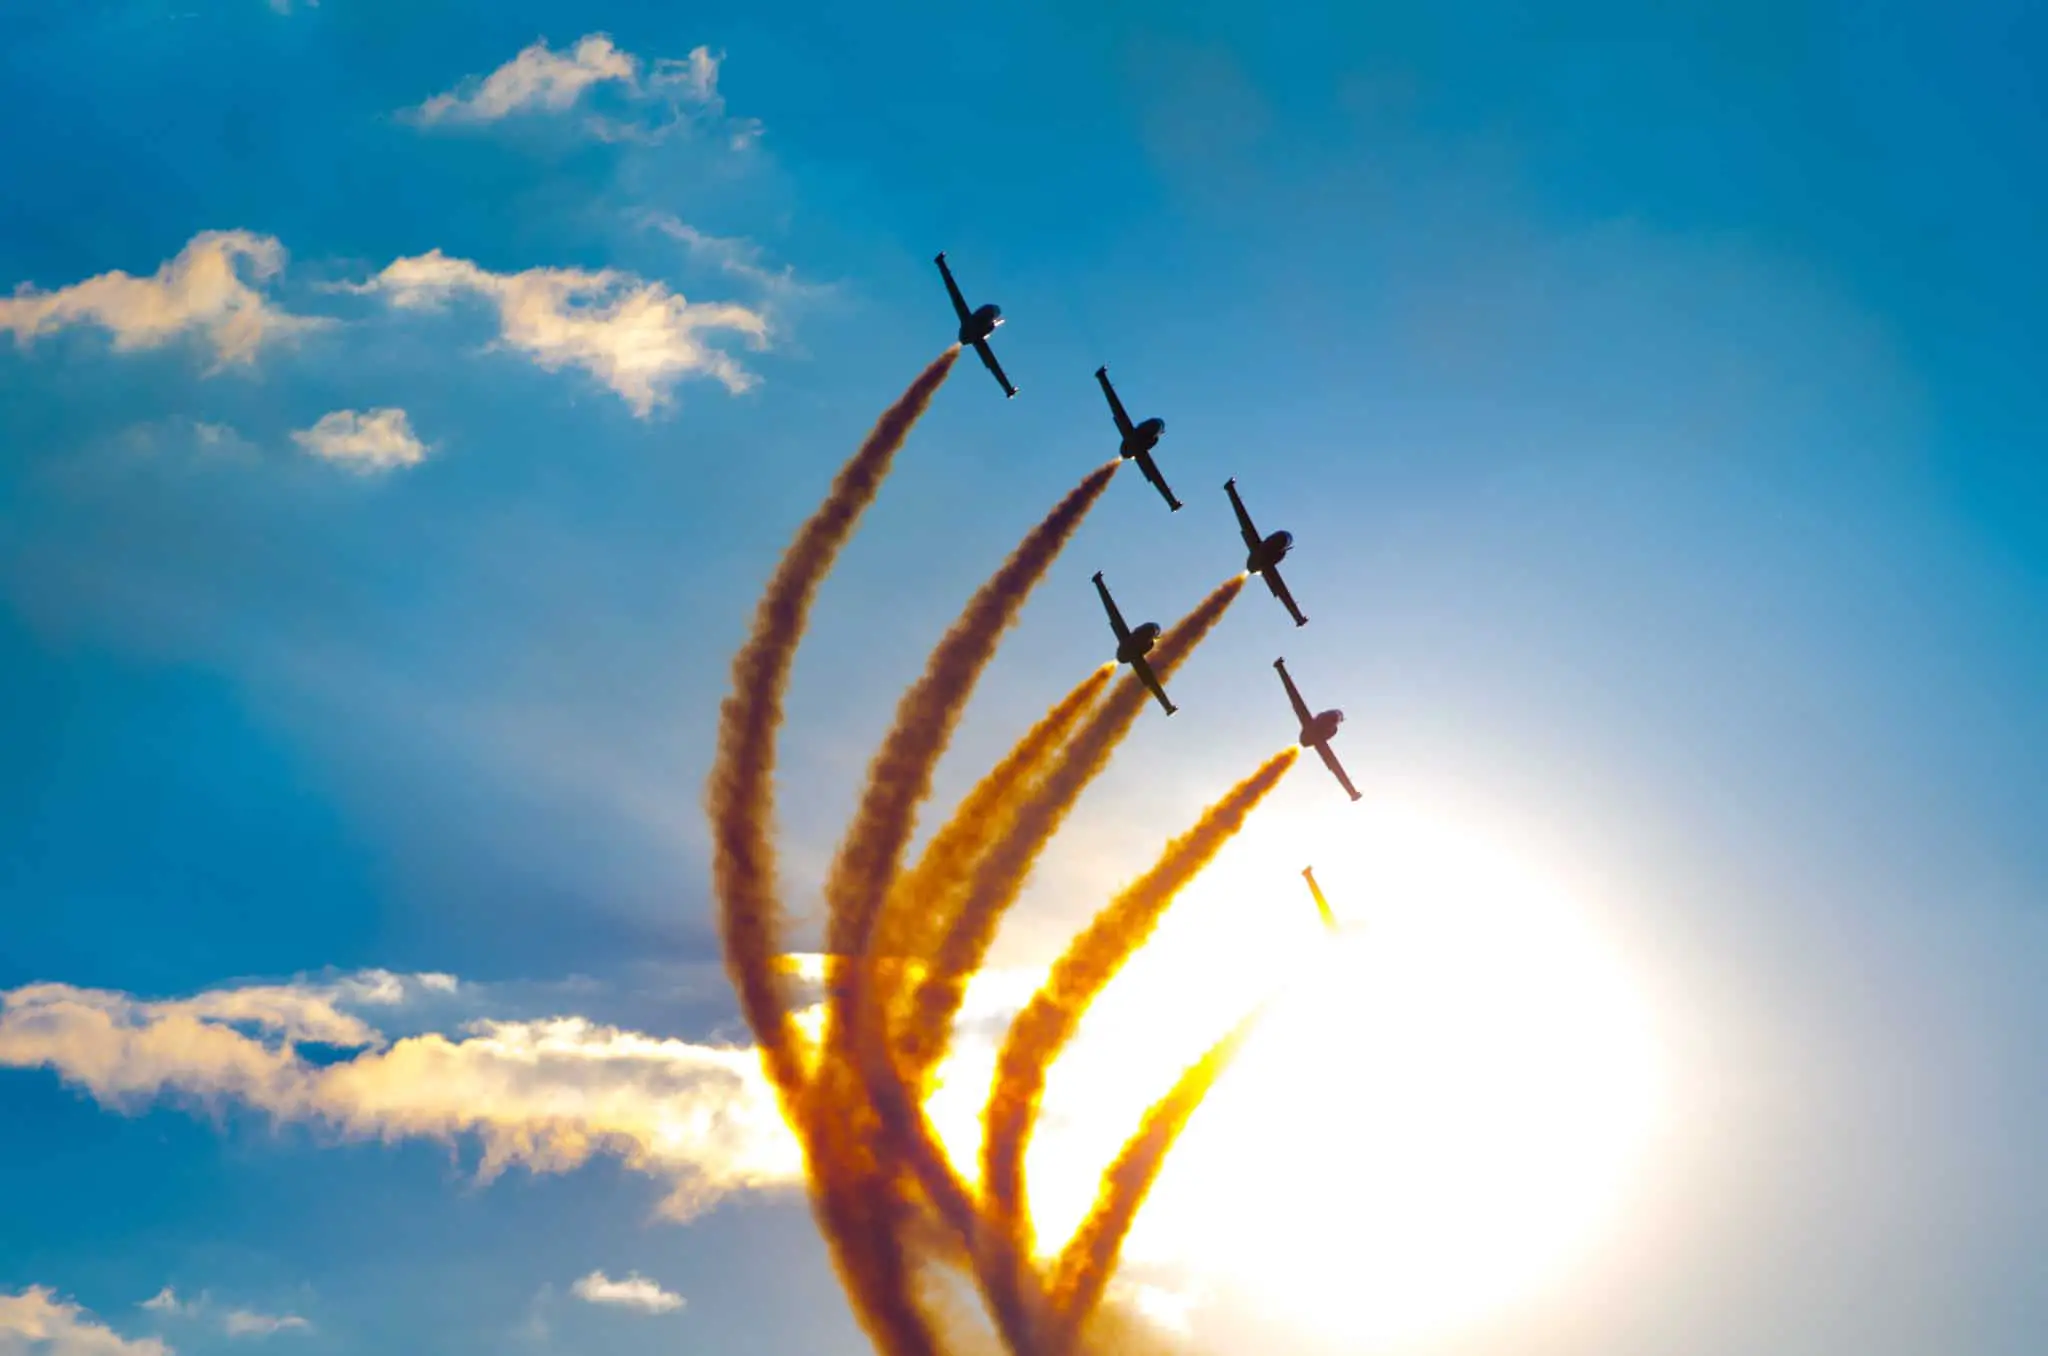 Your Insider Ticket to the Oshkosh Air Show Take To The Air